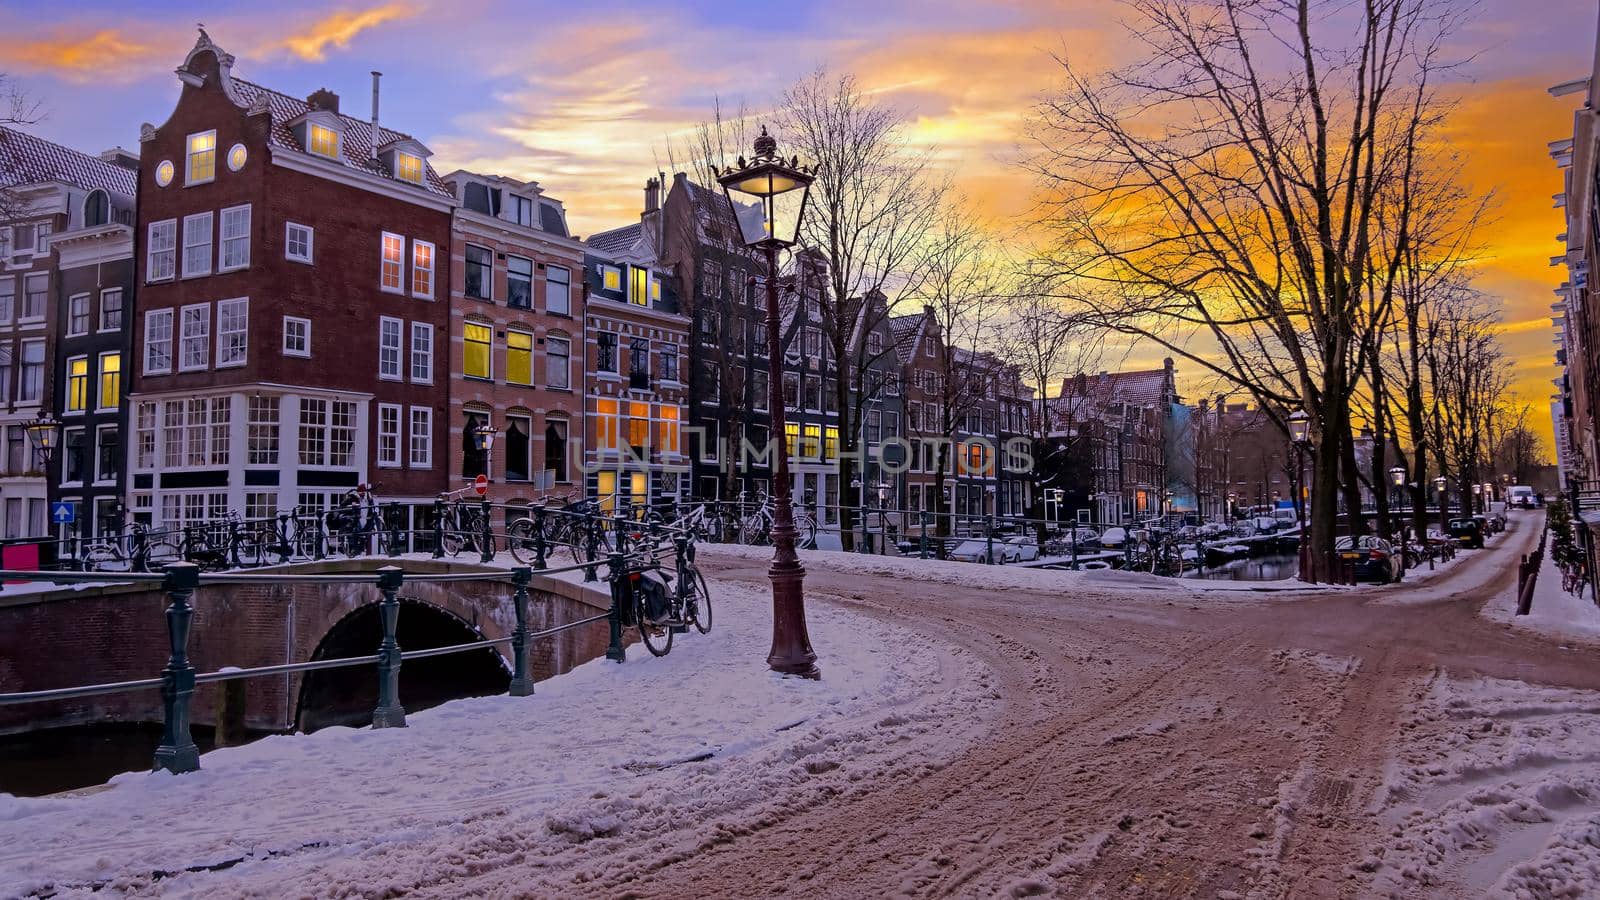 City scenic from a snowy Amsterdm in winter in the Netherlands at sunset